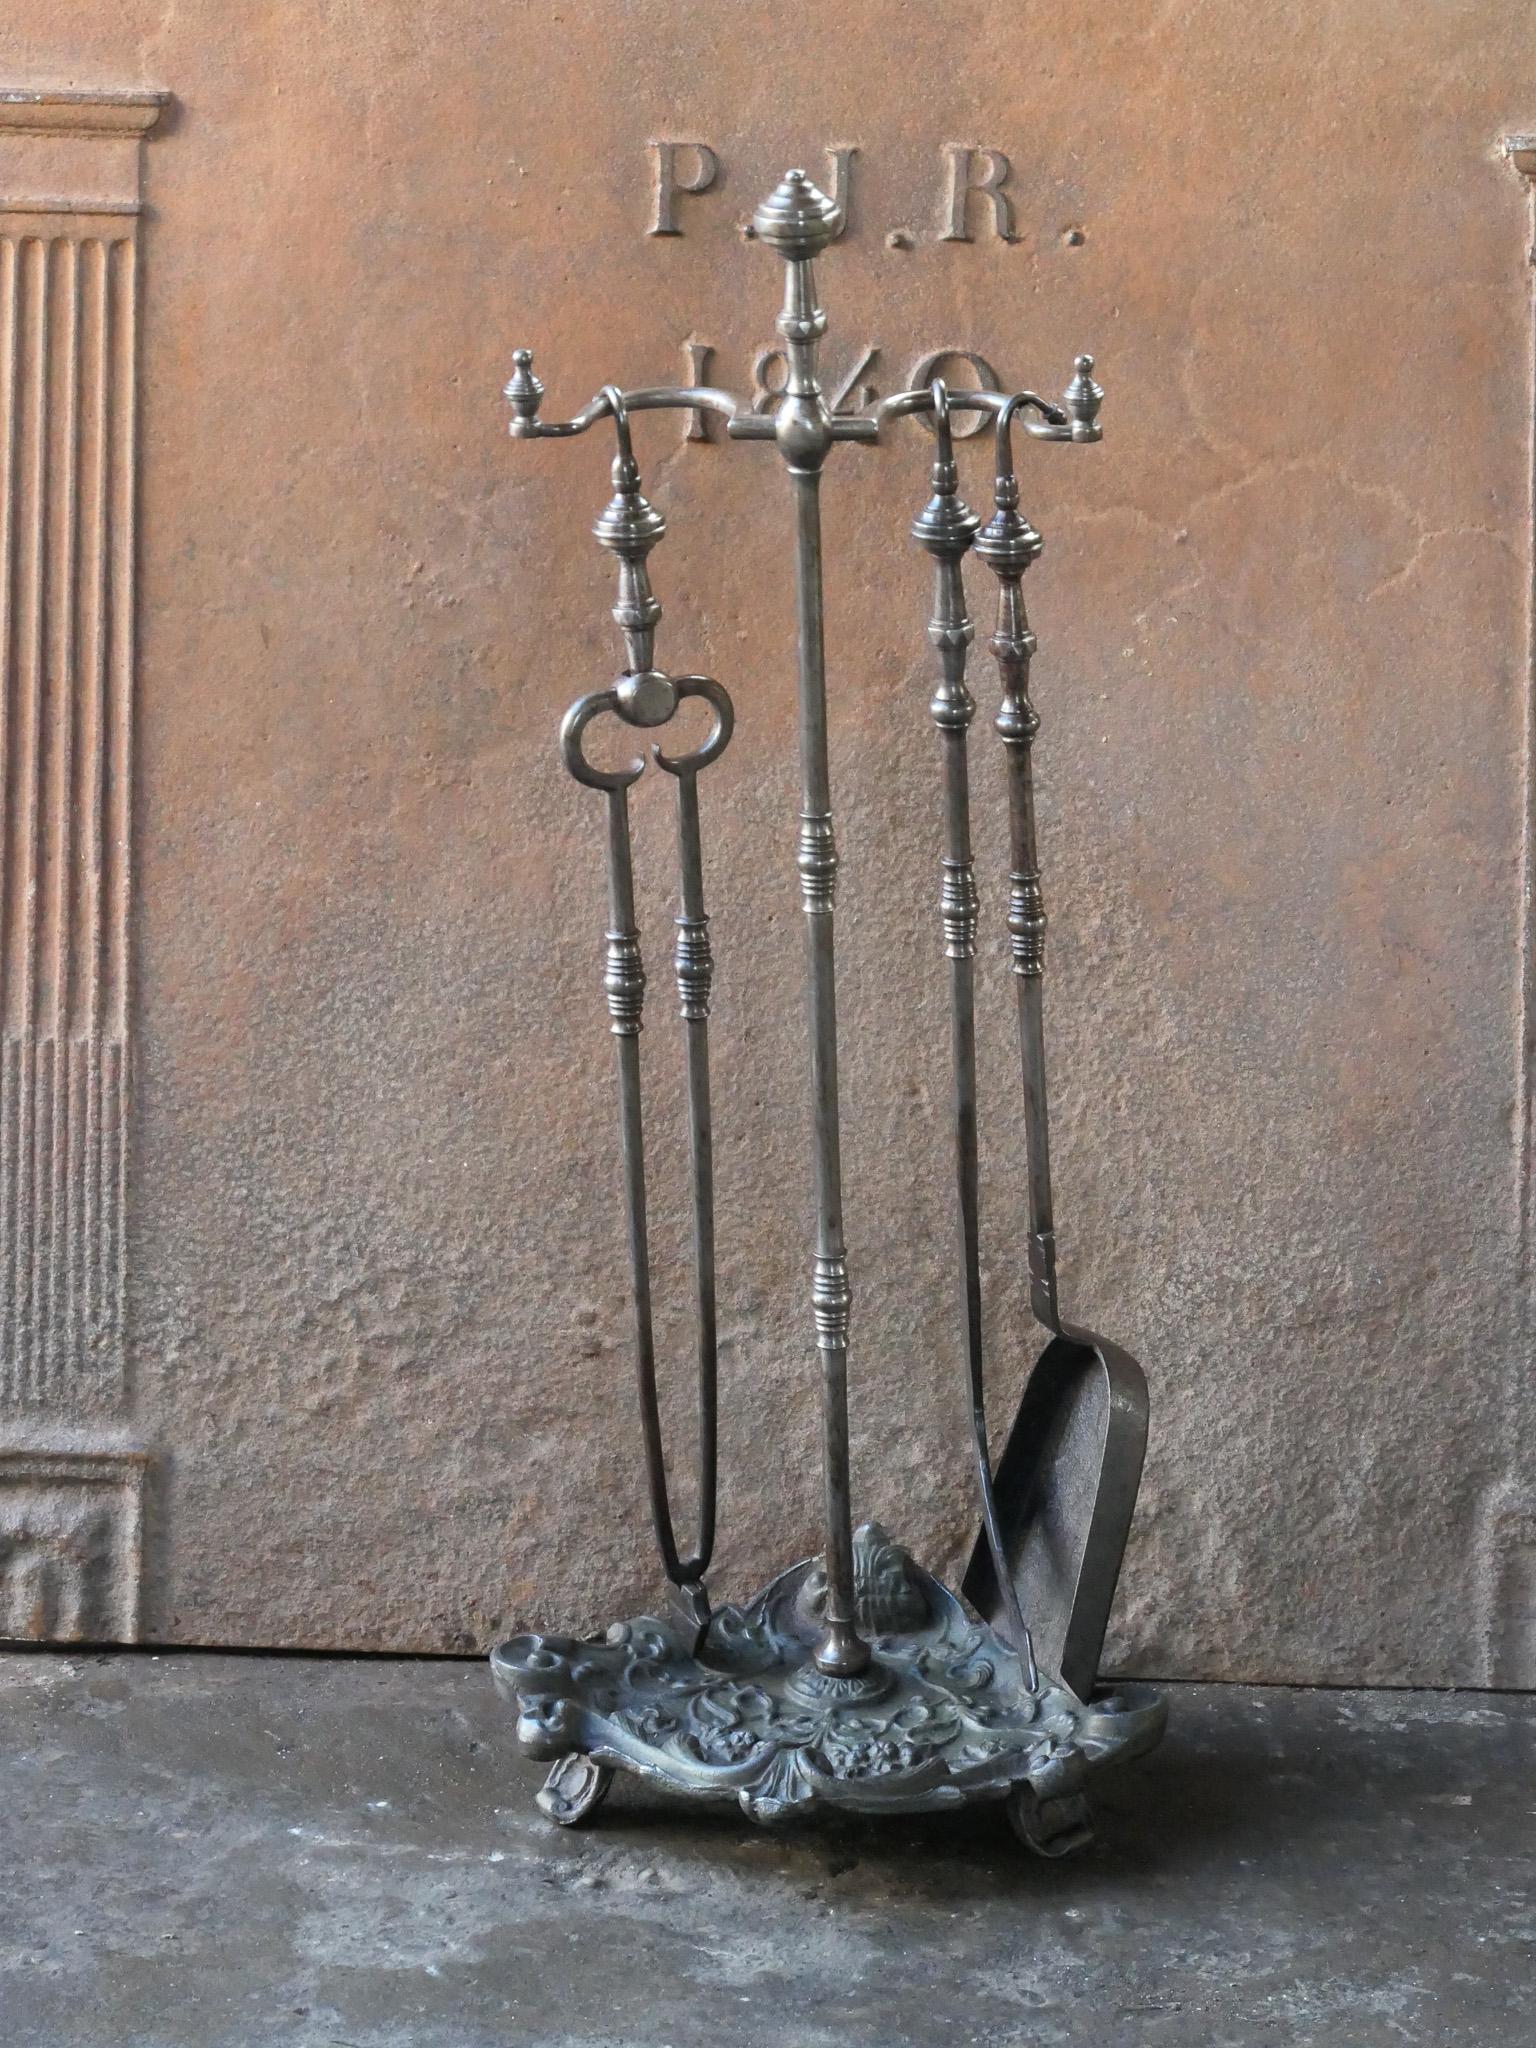 Beautiful 18th century Dutch Louis XV period fireplace toolset made of wrought iron and cast iron. The toolset consists of three fire irons and a stand. The condition is good.








.